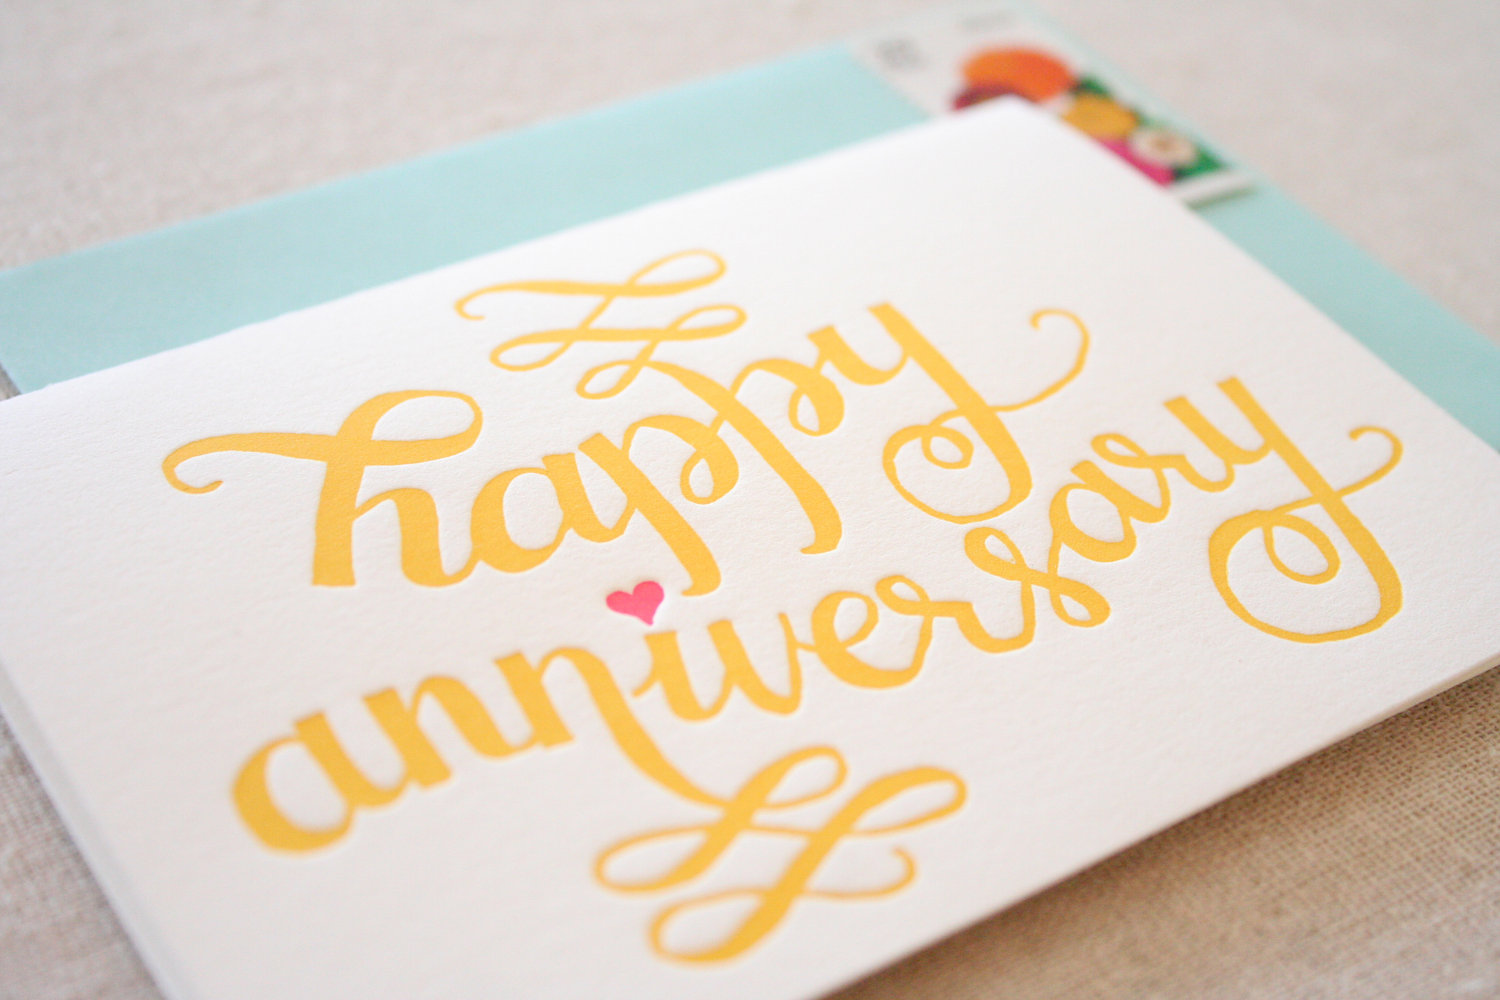 What are some sweet quotes to say to your special someone on your anniversary?